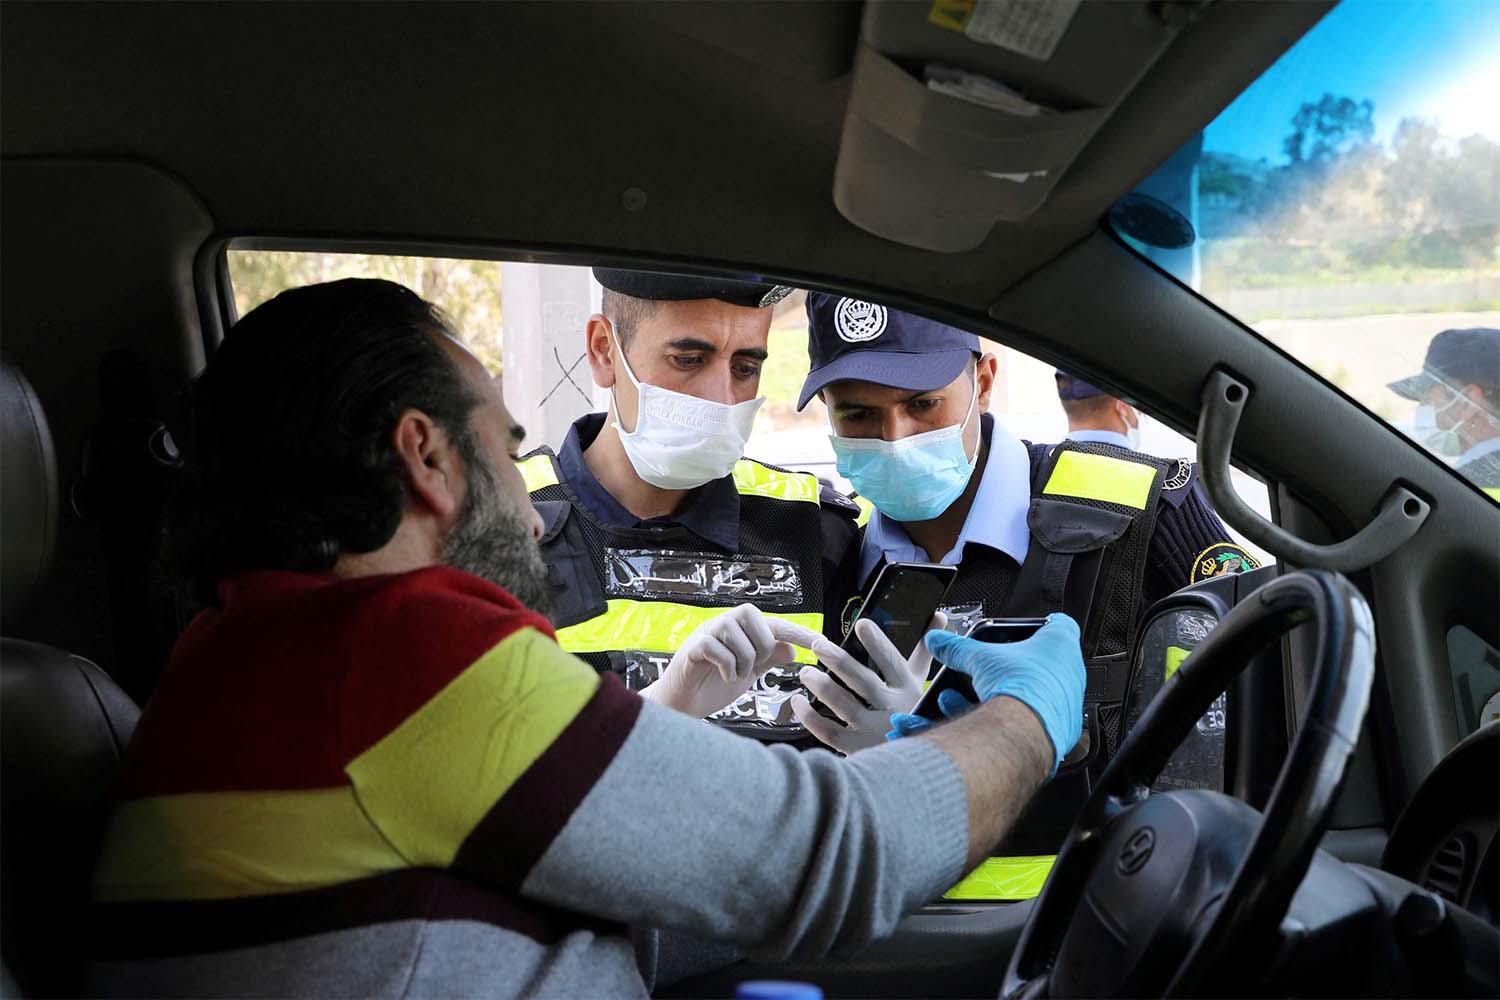 Jordanian policemen check the electronic pass of a driver in Amman